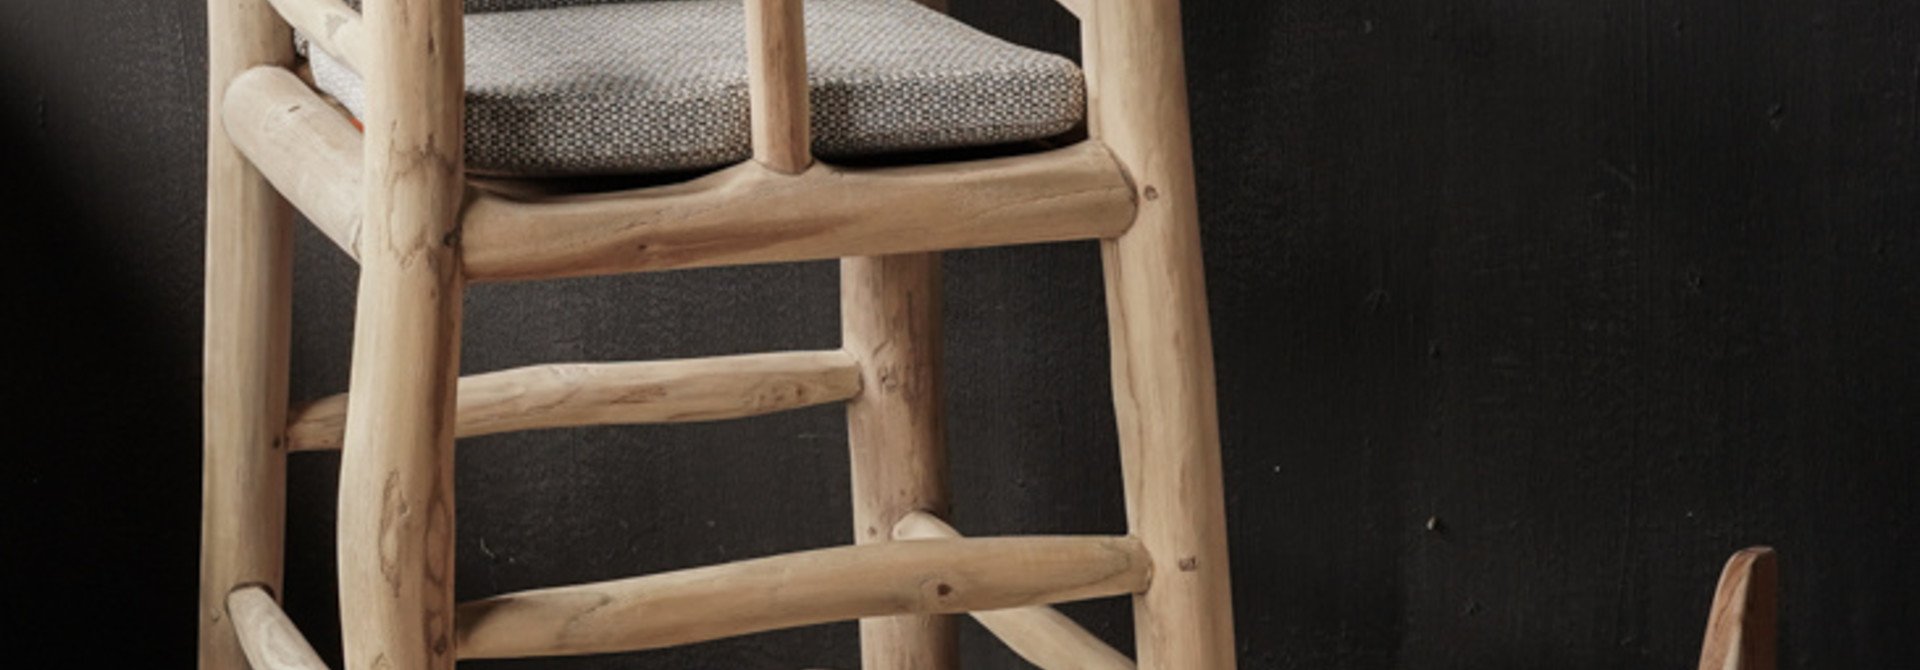 Cool Wooden baby chair high